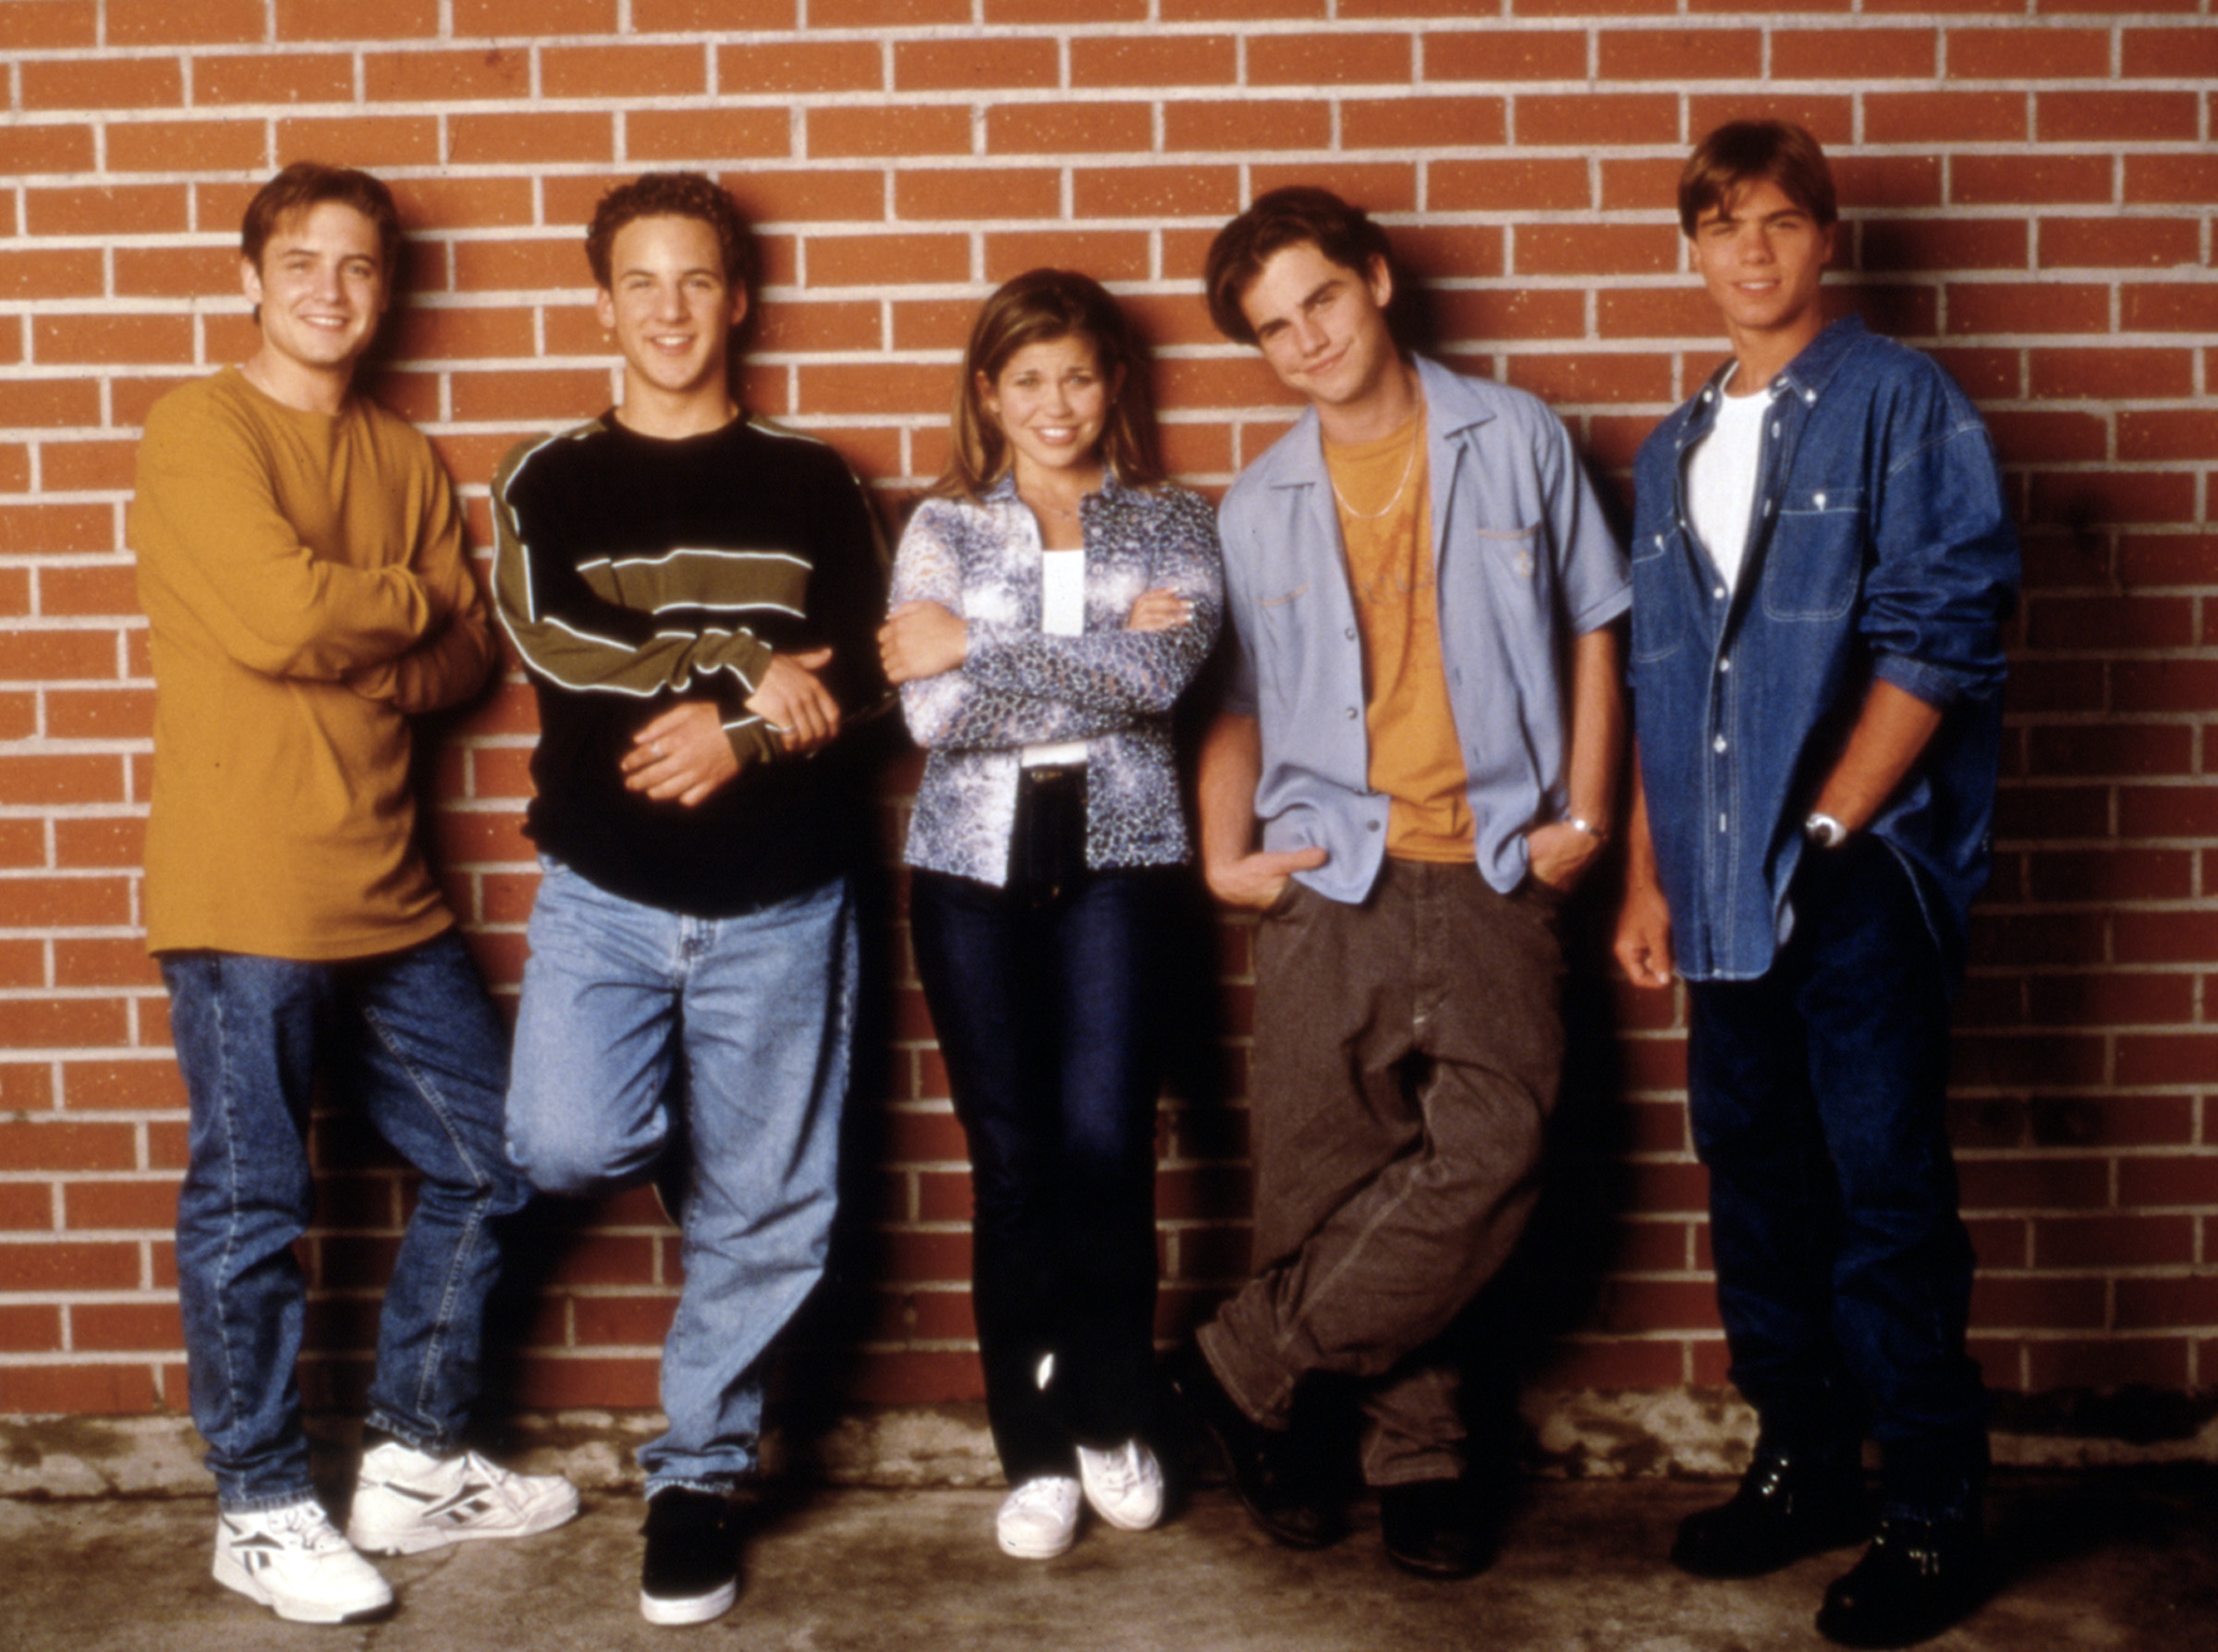 BOY MEETS WORLD, Will Friedle, Ben Savage, Danielle Fishel, Rider Strong, Matthew Lawrence (1997-2000). 1993-2000. (c) Buena Vista Television/ Courtesy: Everett Collection.